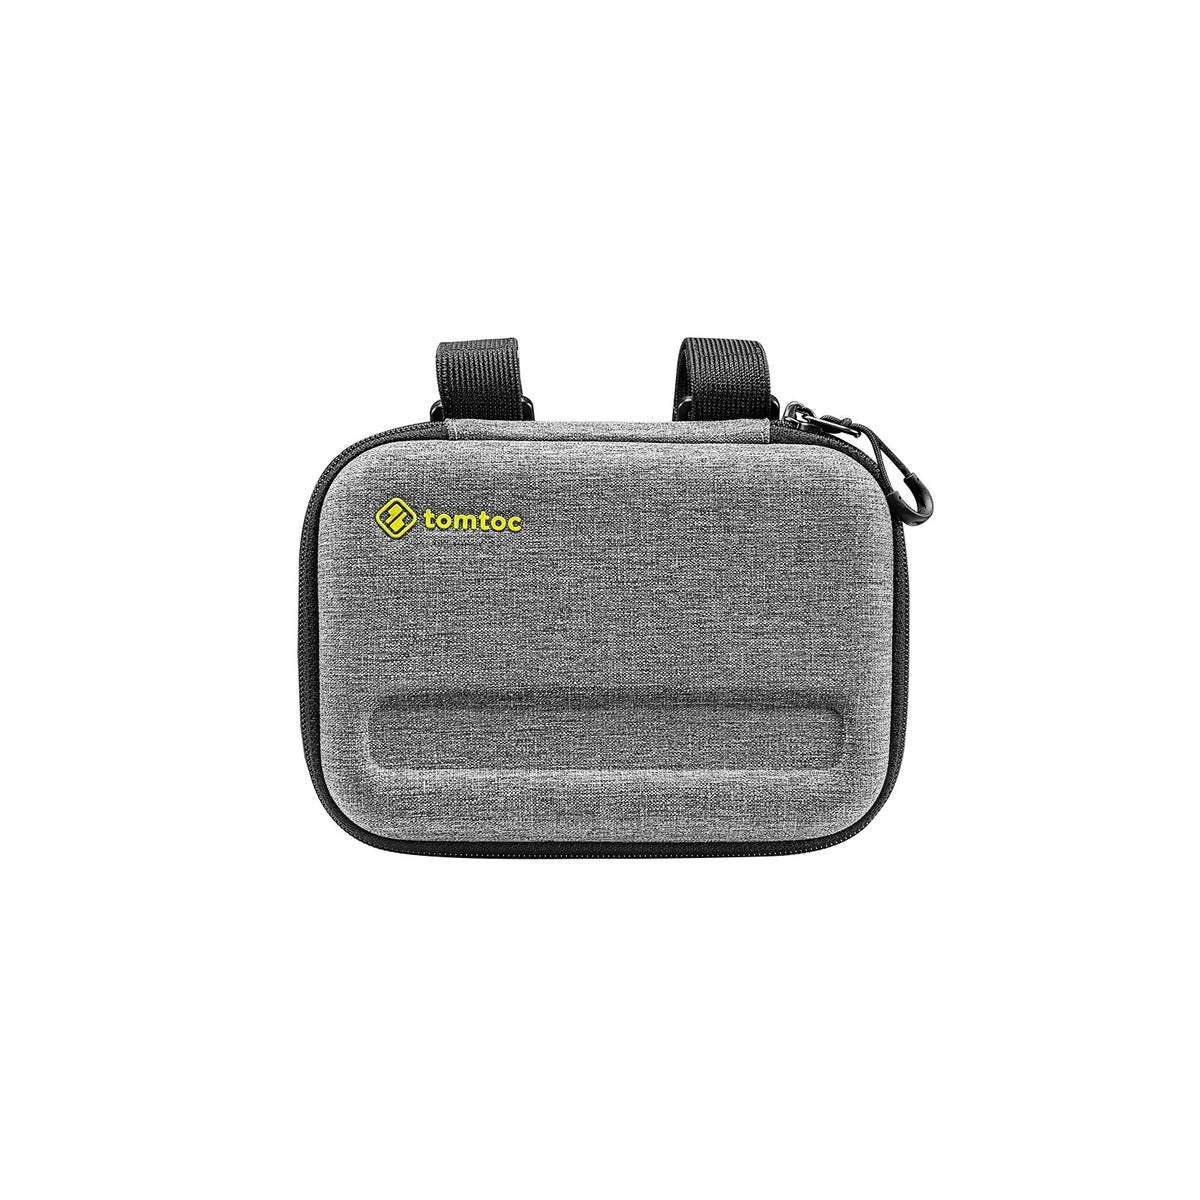 primary_tomtoc Carry Case for GoPro and Accessories